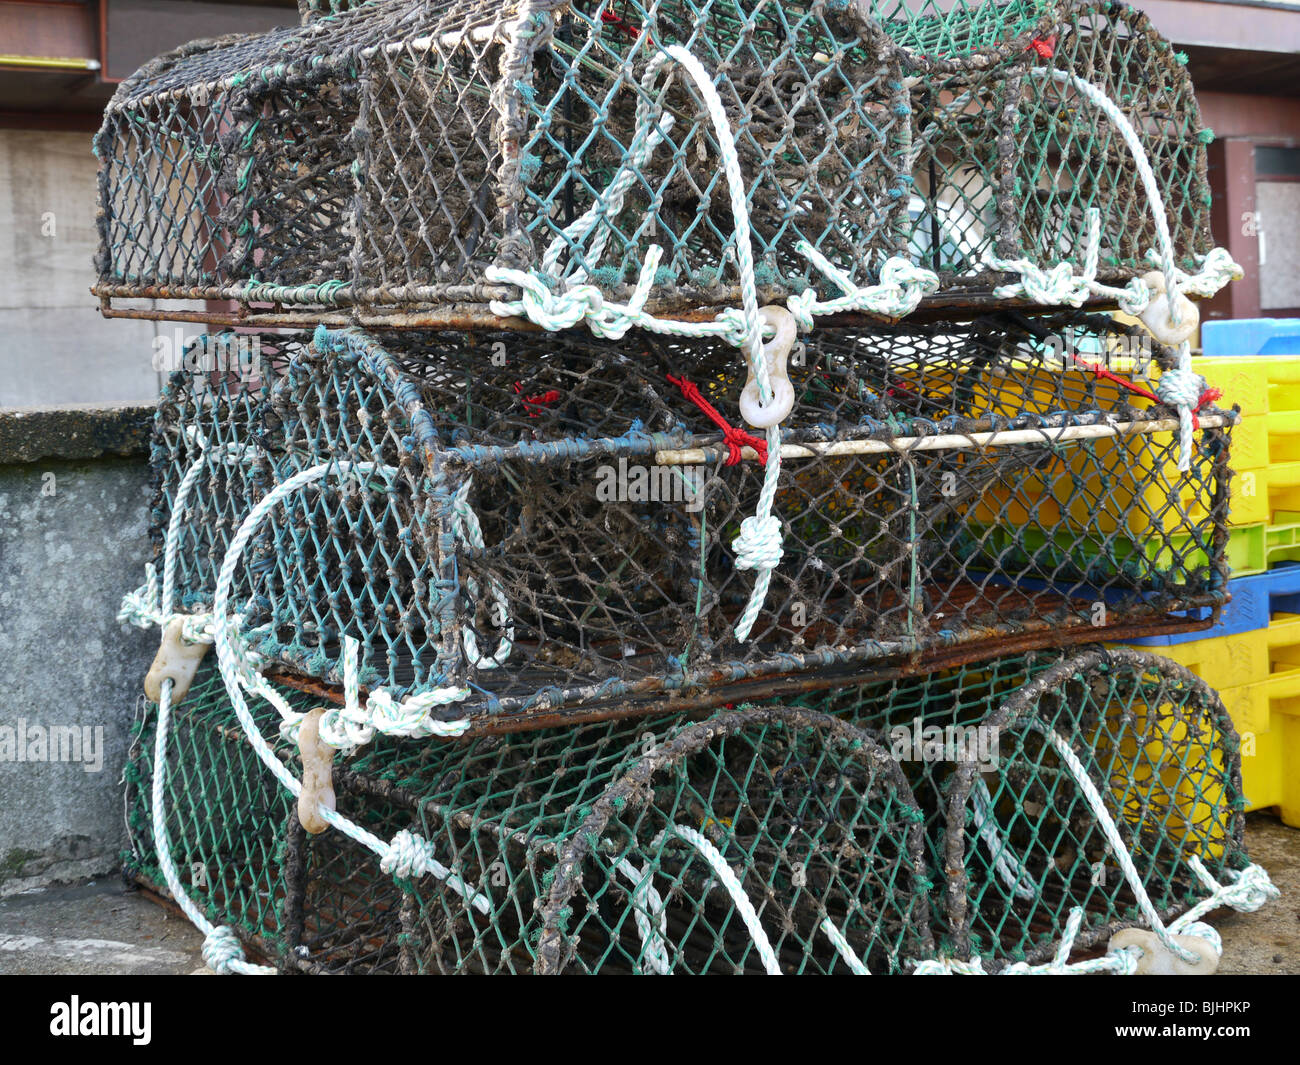 Crab and lobster pots stacked up on the harbour Stock Photo - Alamy